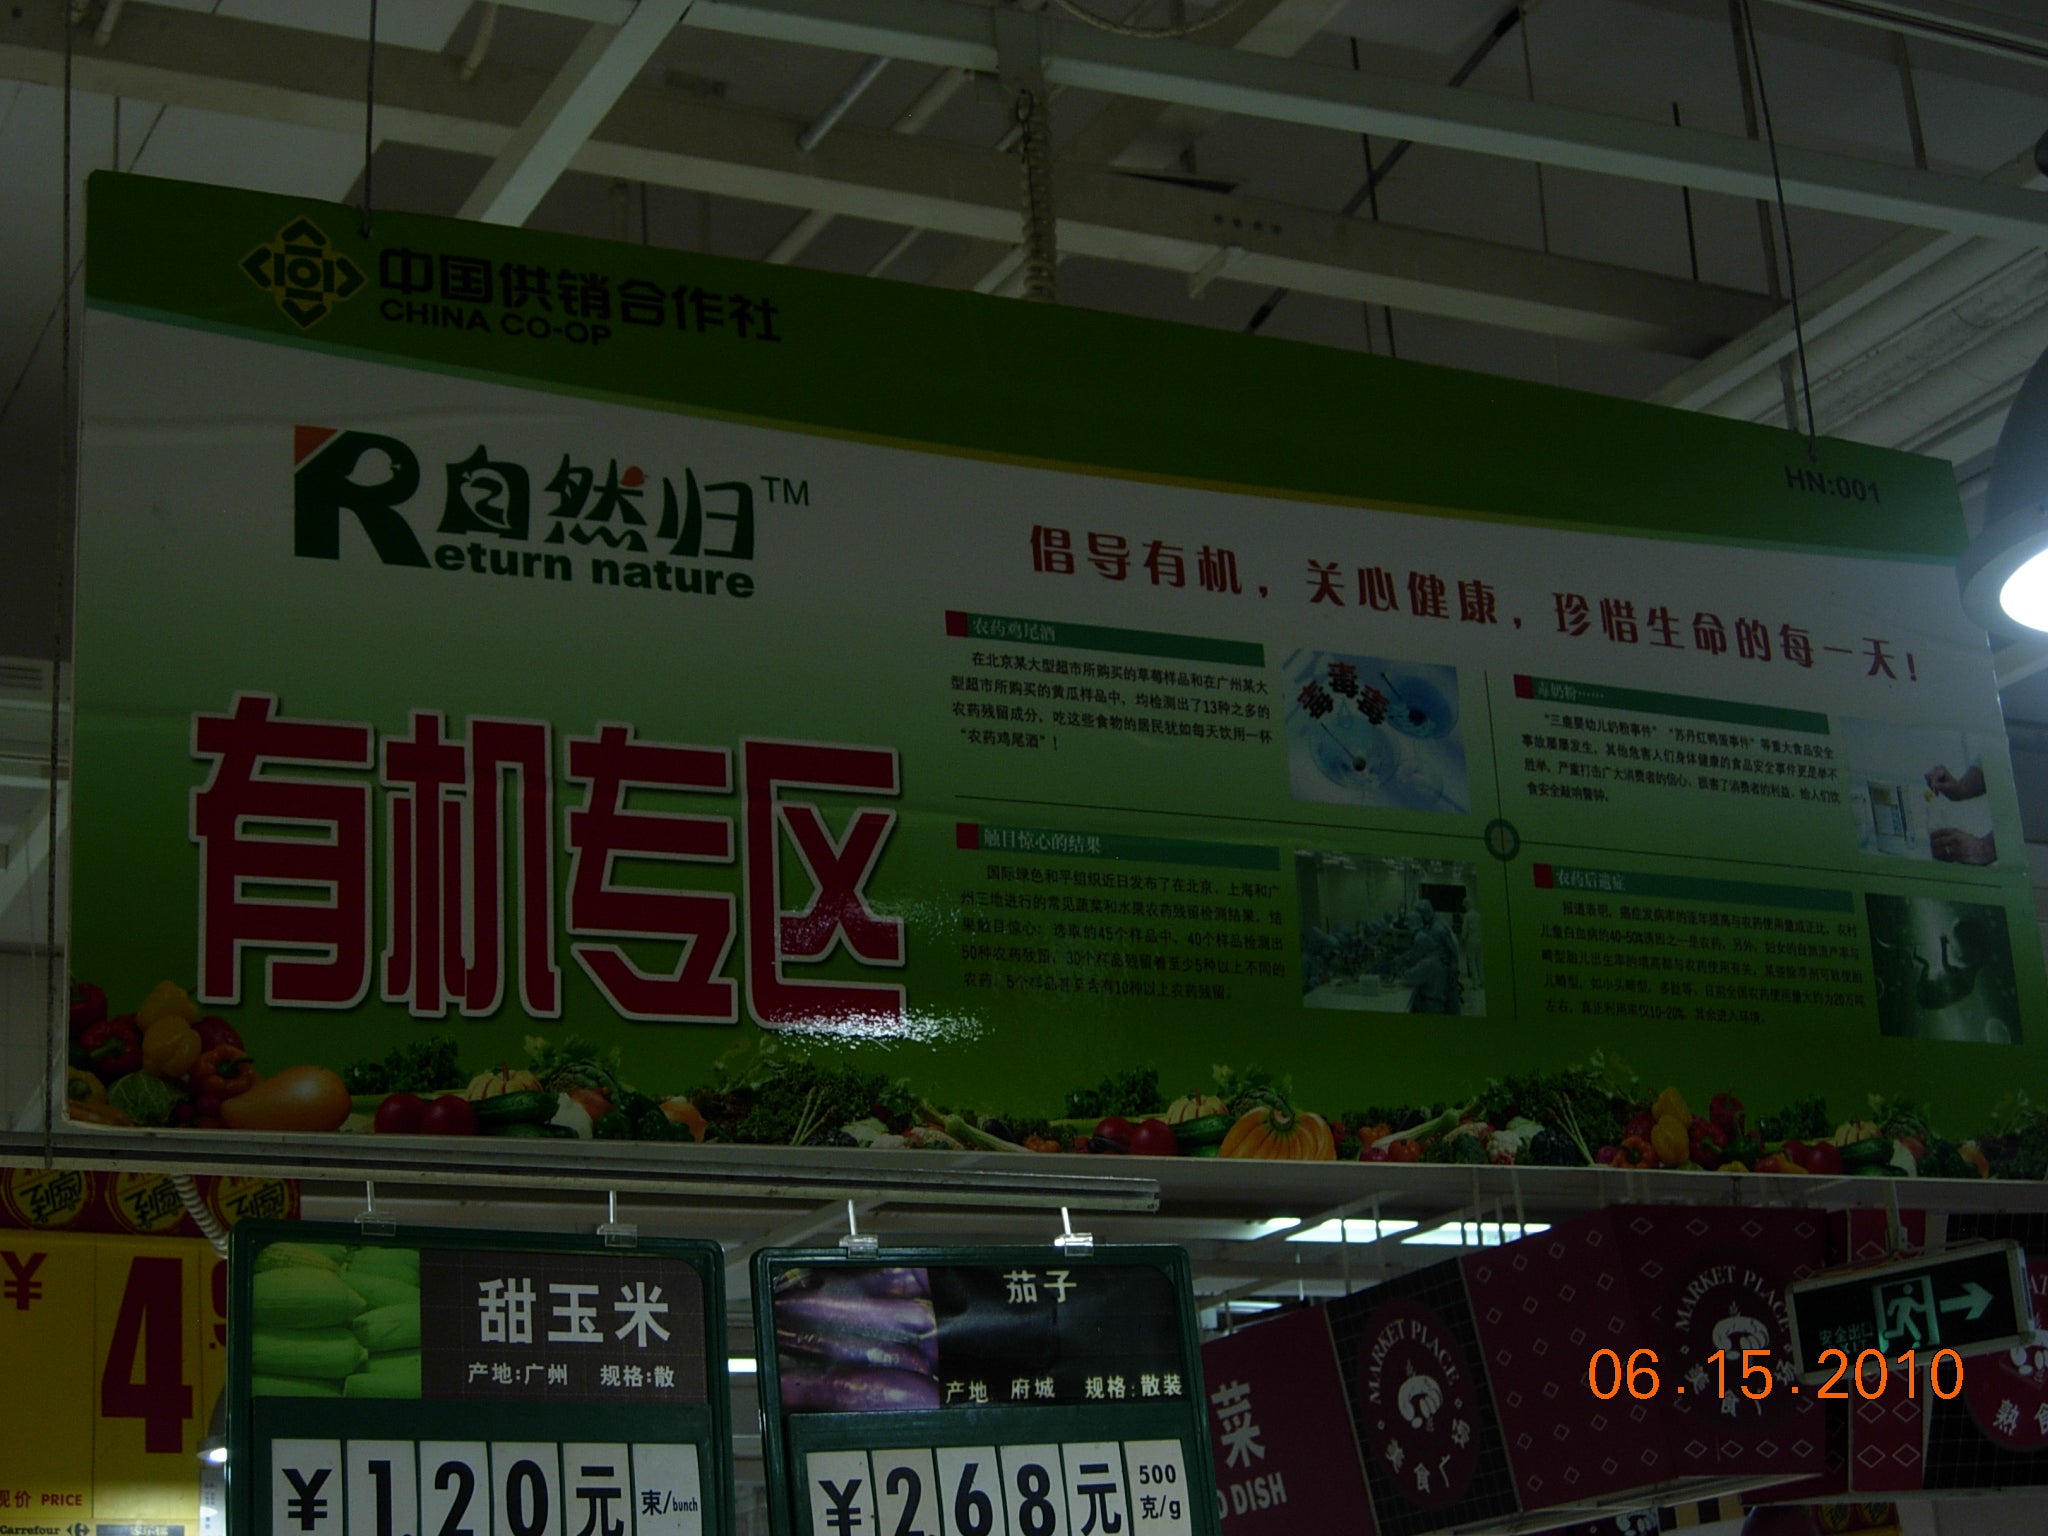 Sign written in Chinese